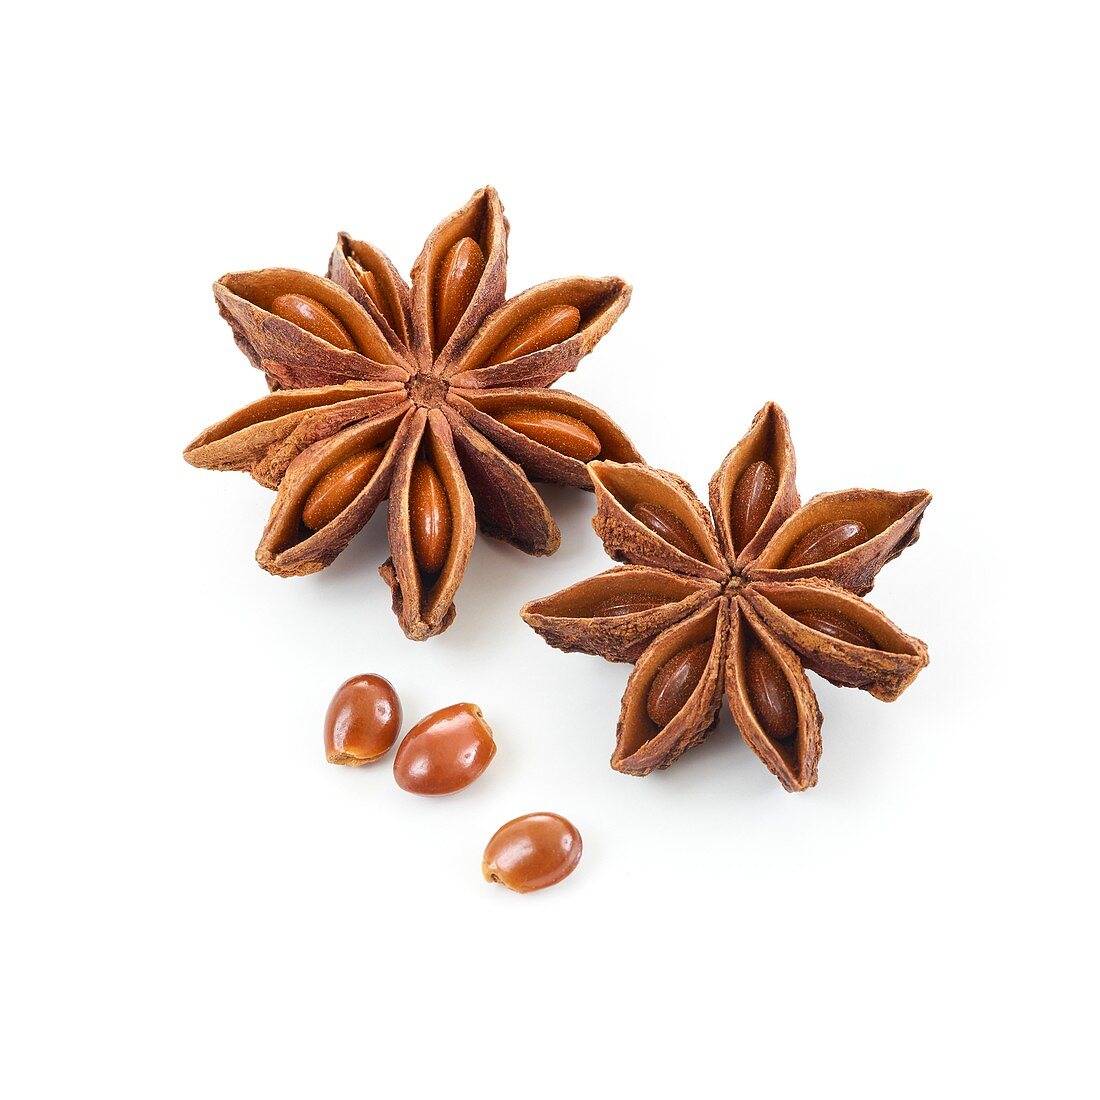 Star anise with seeds